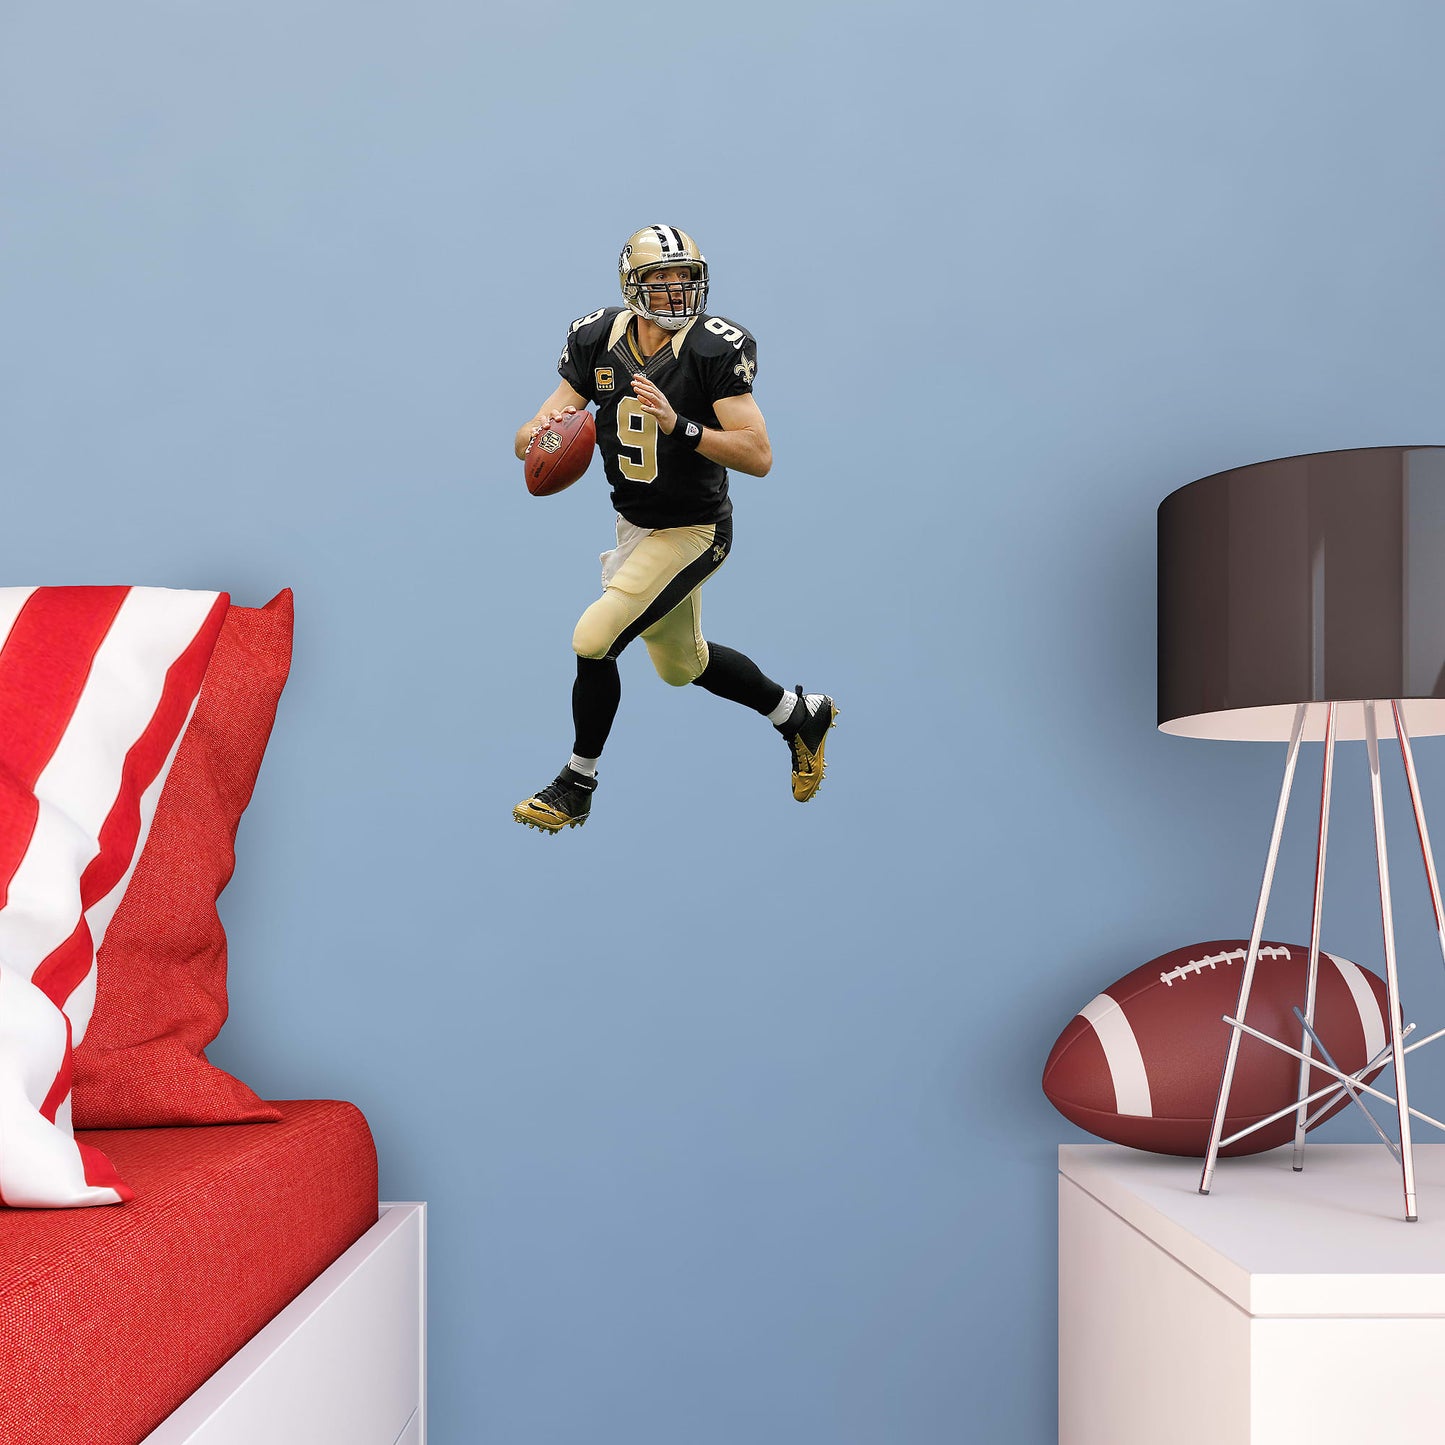 Bring the action of the NFL into your home with a wall decal of Drew Brees! High quality, durable, and tear resistant, you'll be able to stick and move it as many times as you want to create the ultimate football experience in any room!